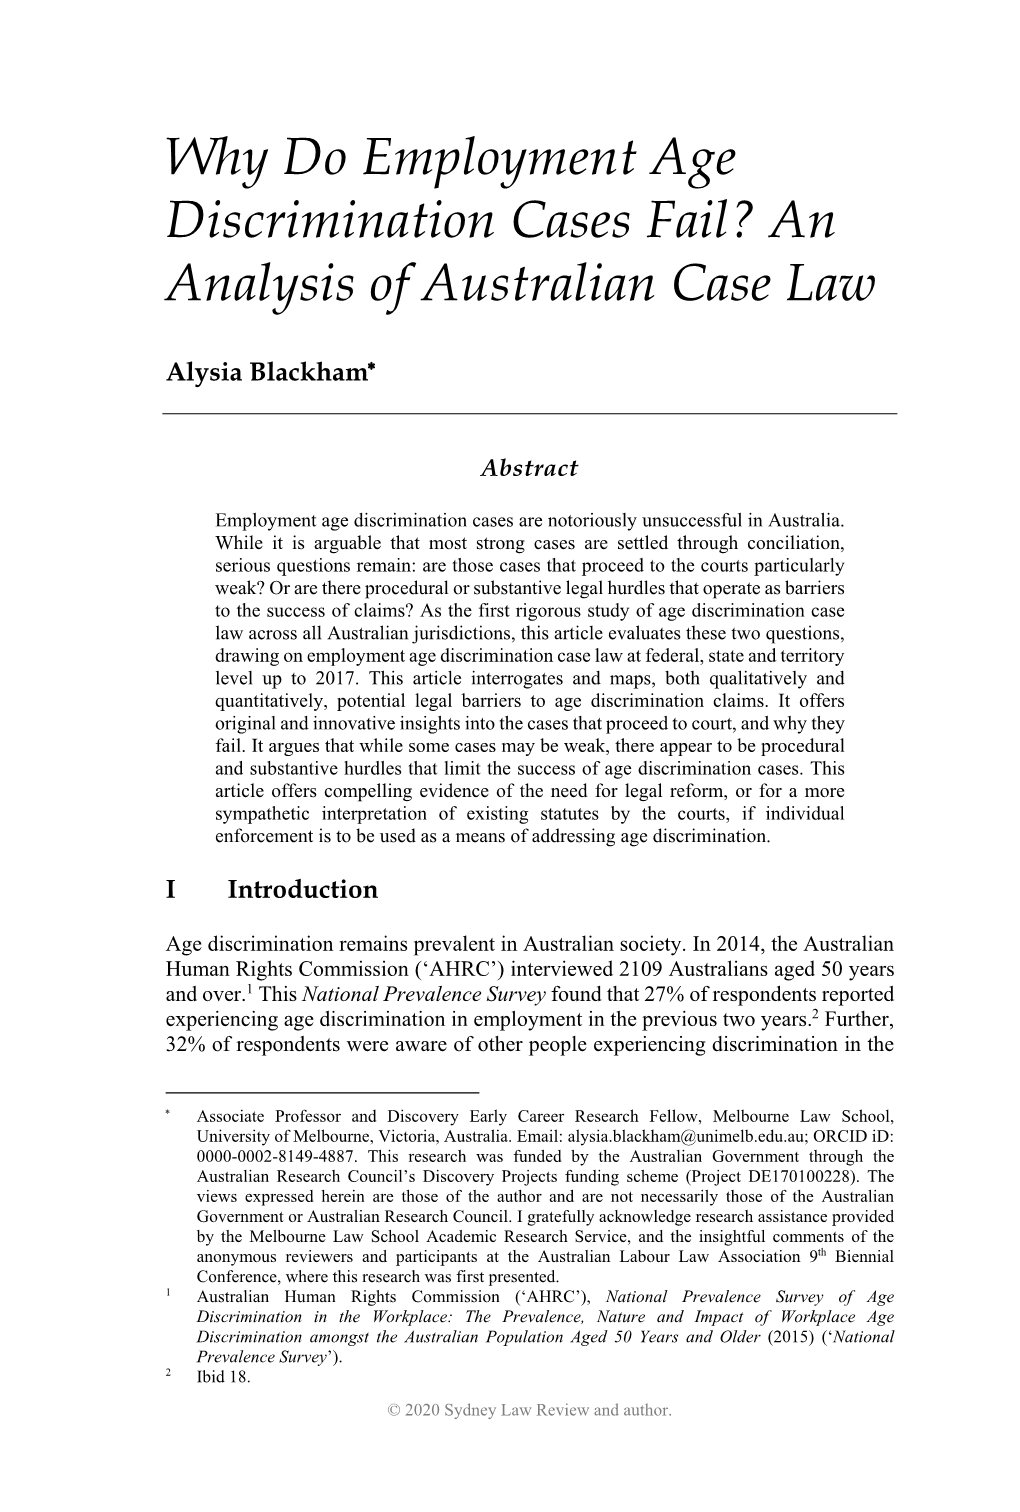 Why Do Employment Age Discrimination Cases Fail? an Analysis of Australian Case Law